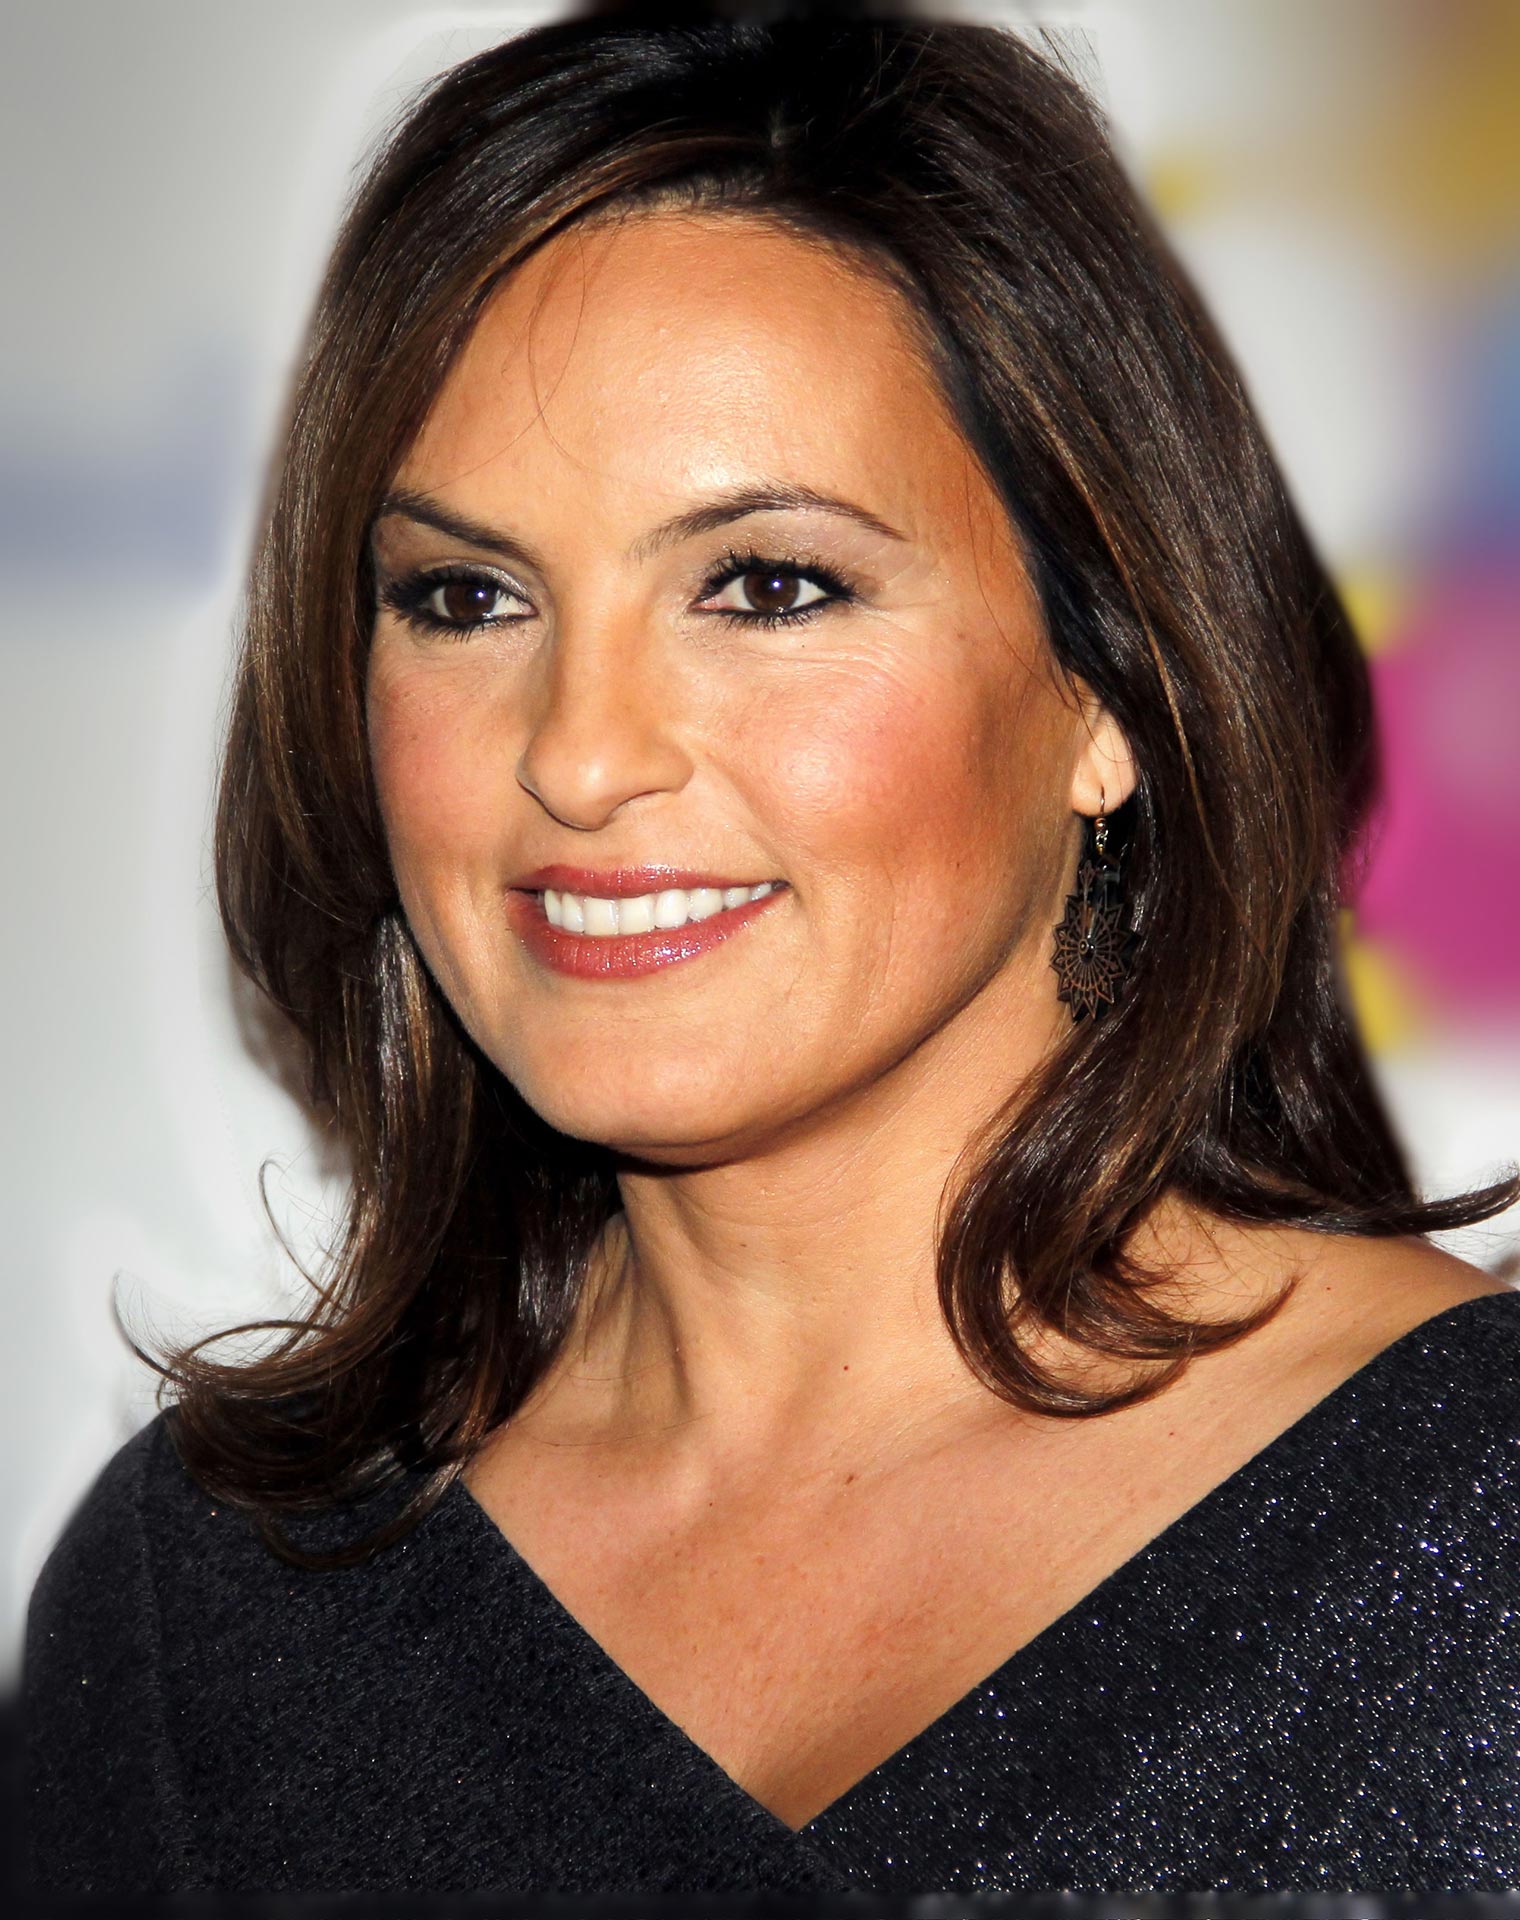 Law & Order: SVU star Mariska Hargitay channels on-screen character while helping lost child